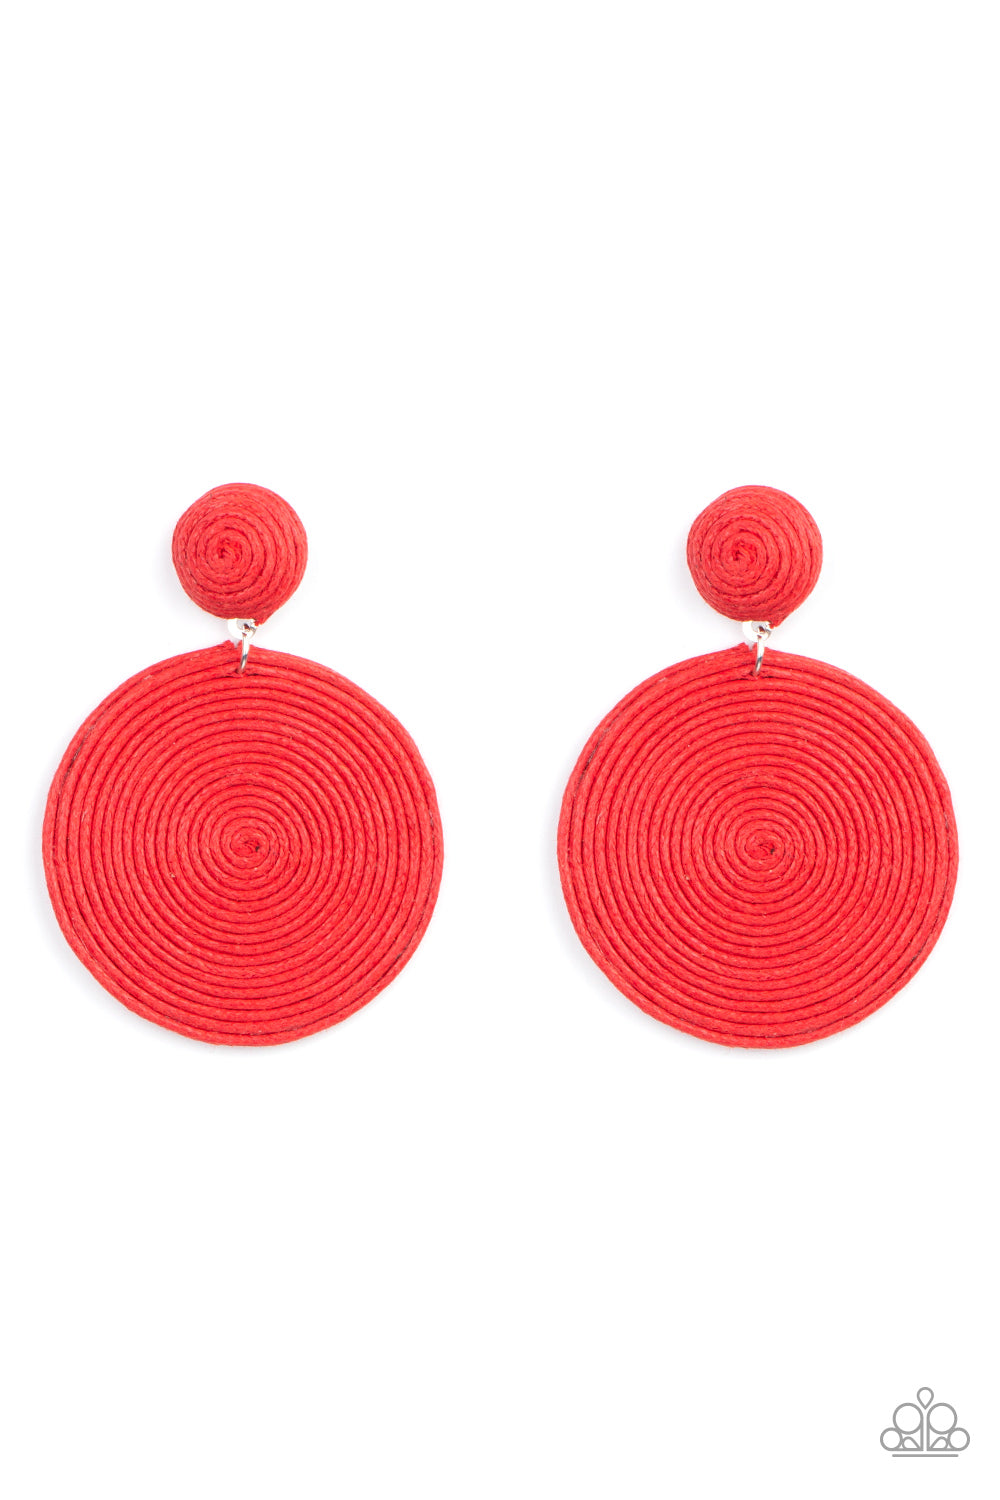 Circulate The Room - Red Earrings  - Paparazzi Accessories